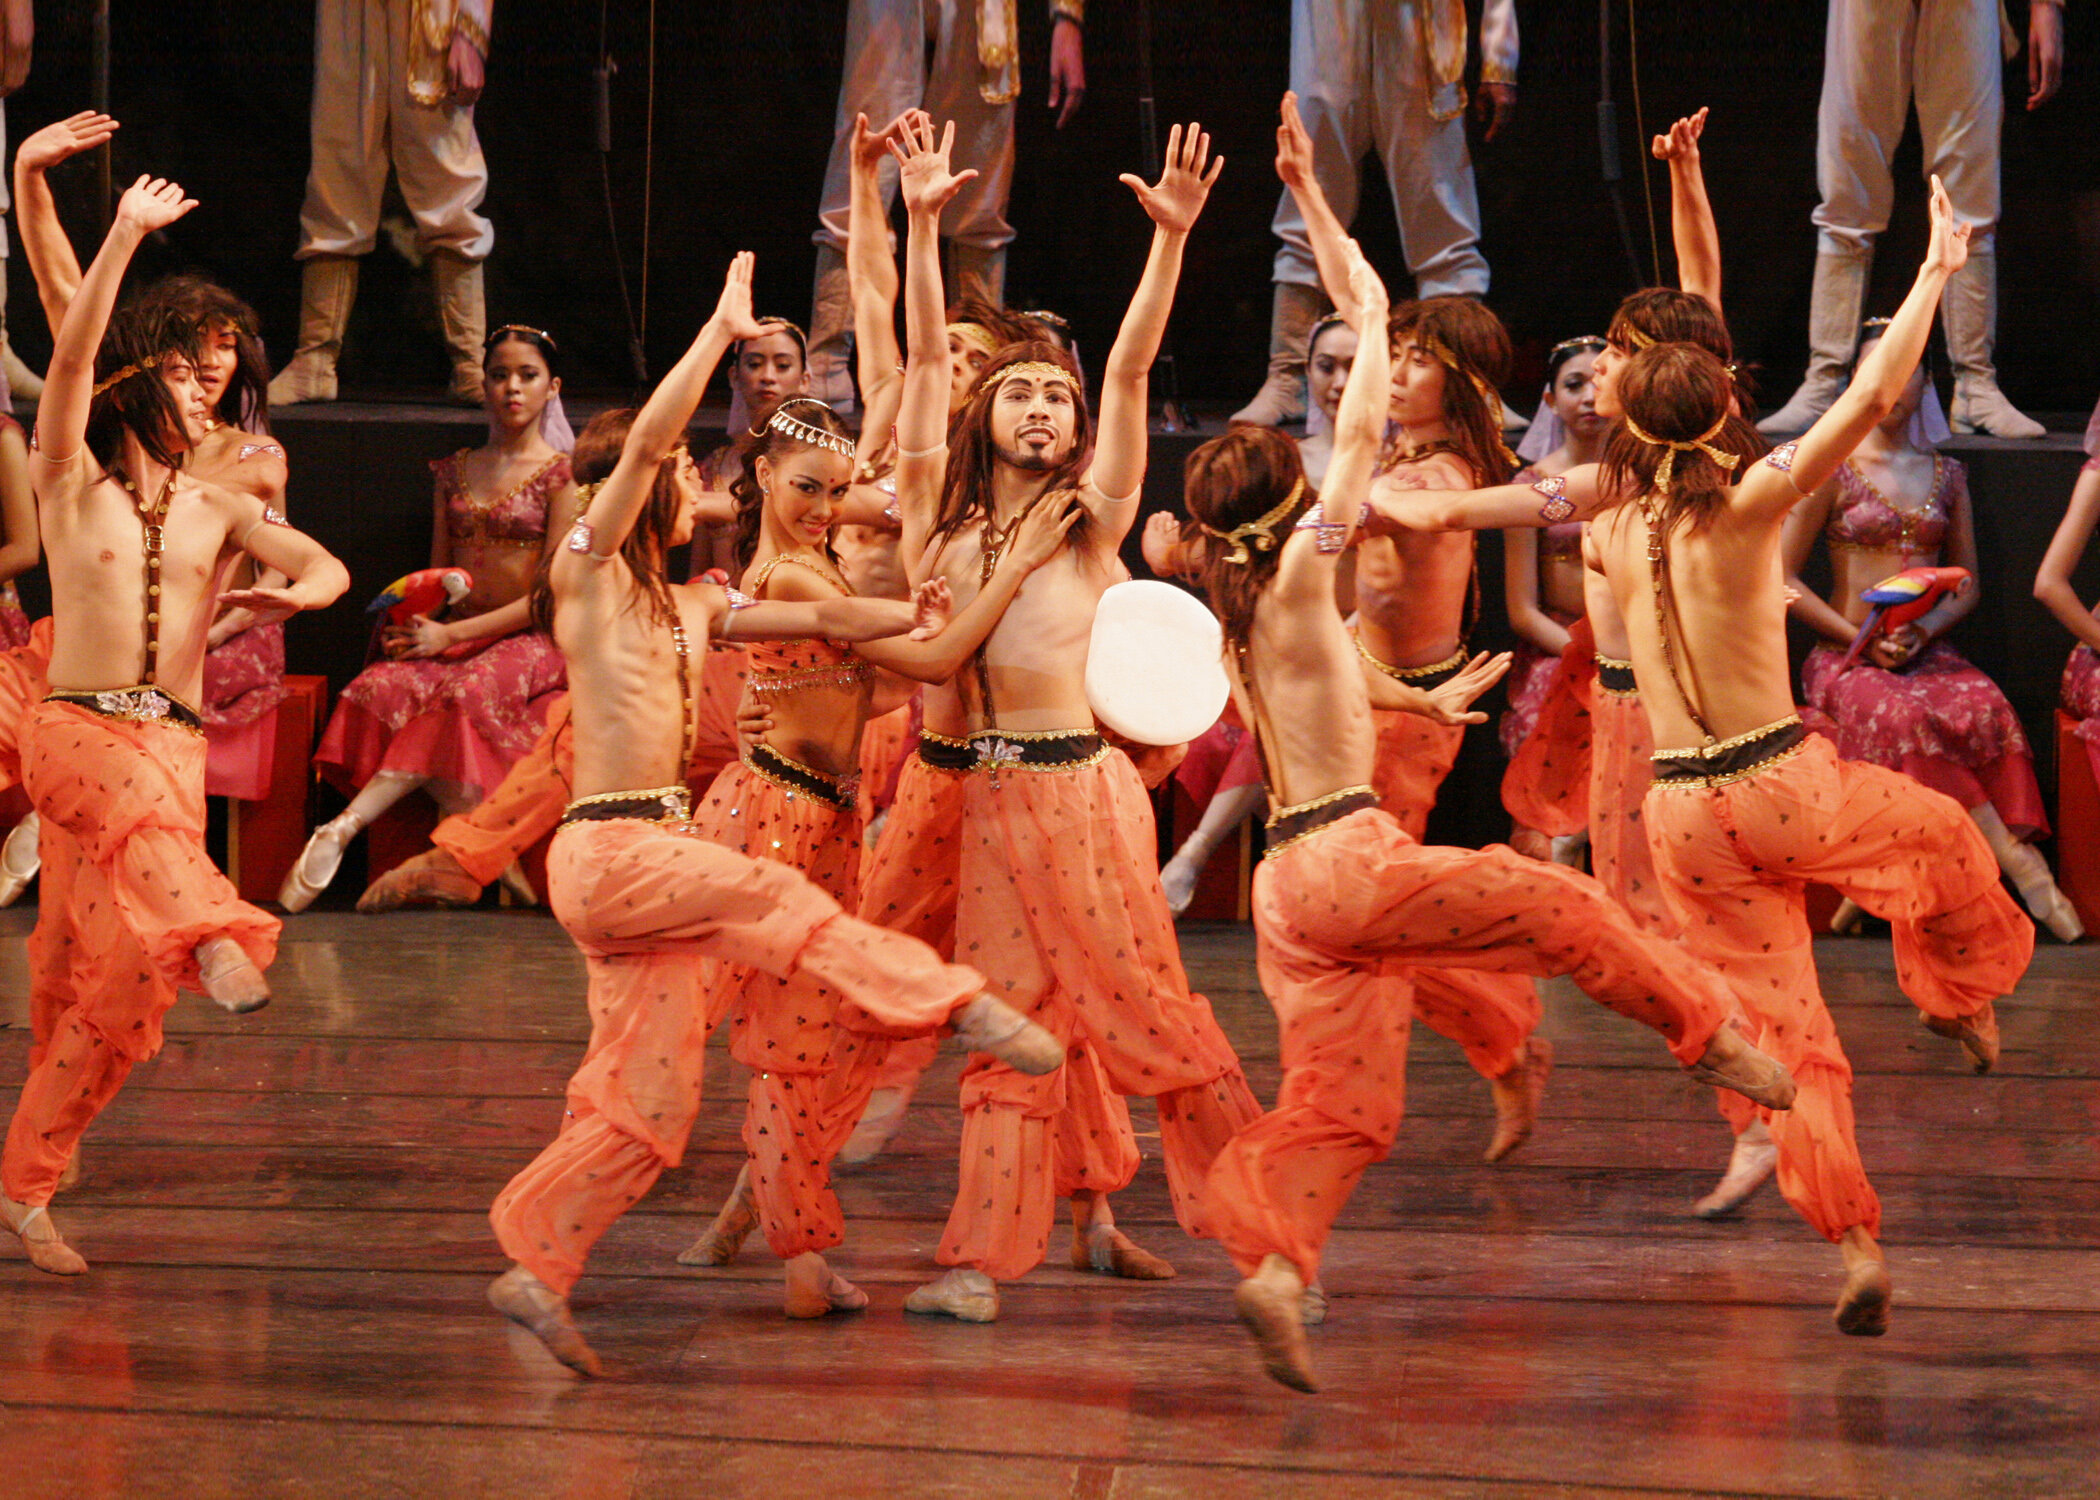    A grand celebration is held at the palace for the betrothal of Solor and Gamzatti in  La Bayadere  (2004). The festivities begin with a pulsating number from these merrymakers in flamboyant orange. Photo by Ocs Alvarez   